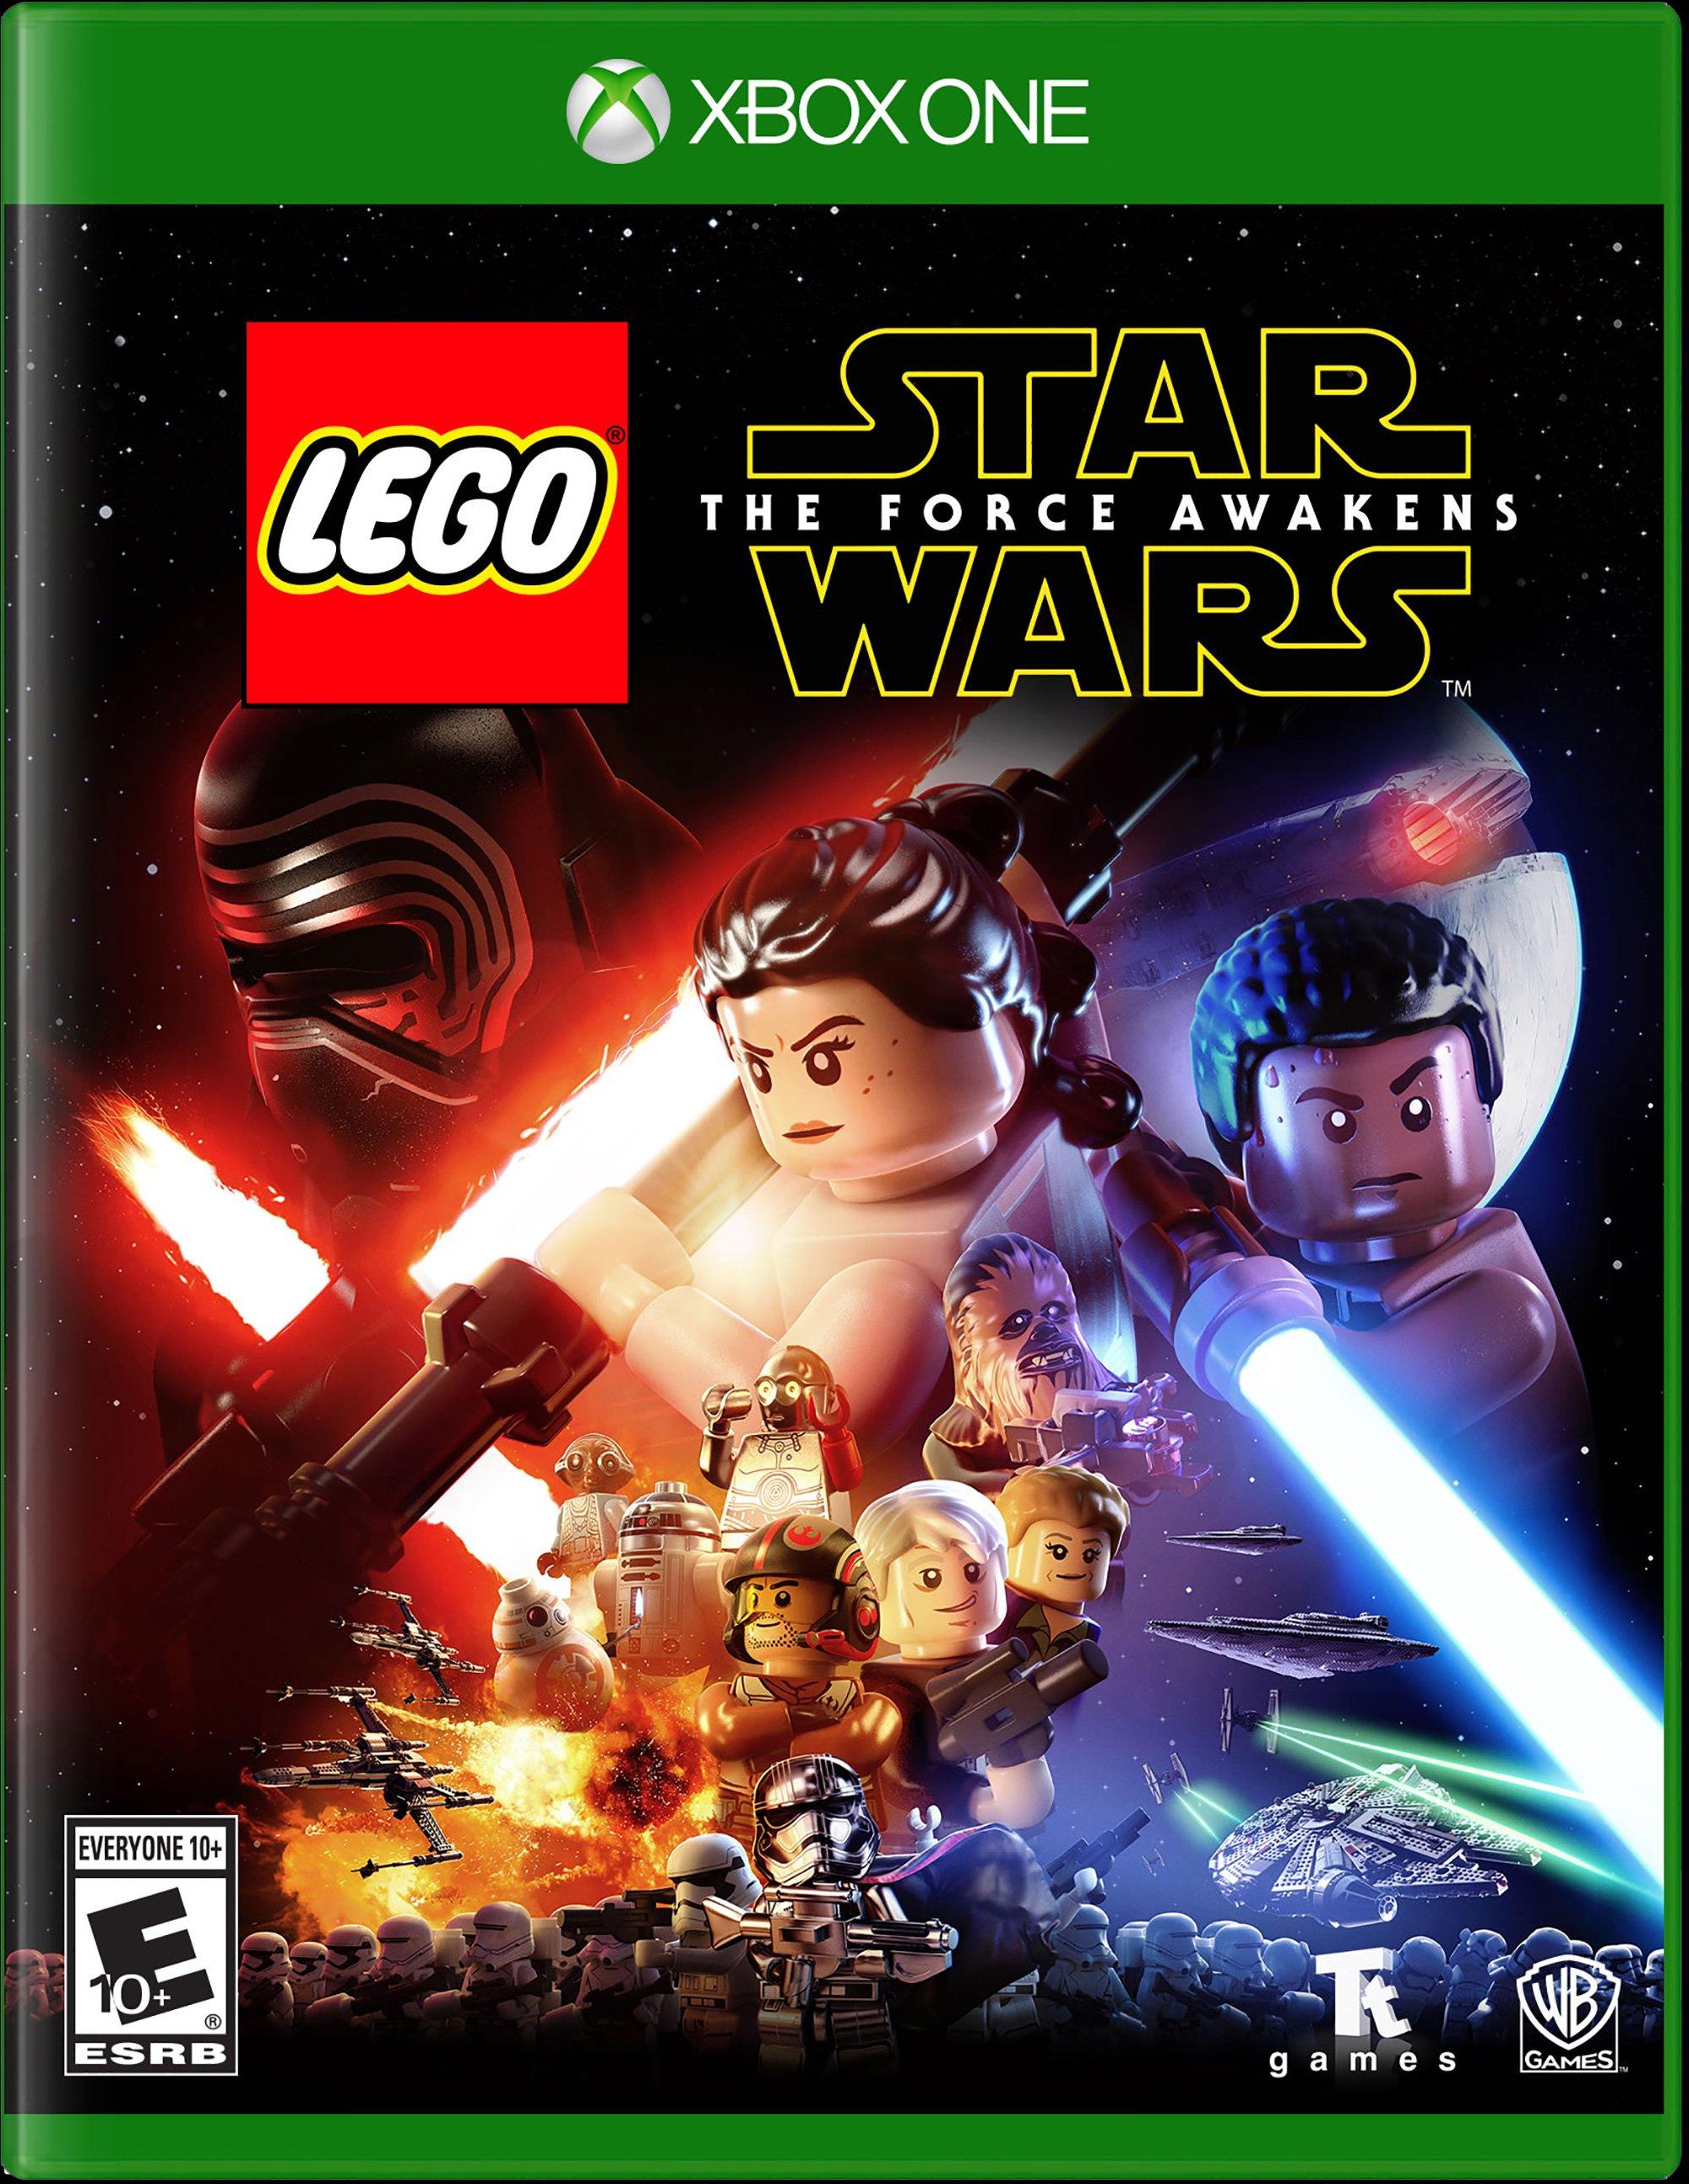 lego star wars new video game